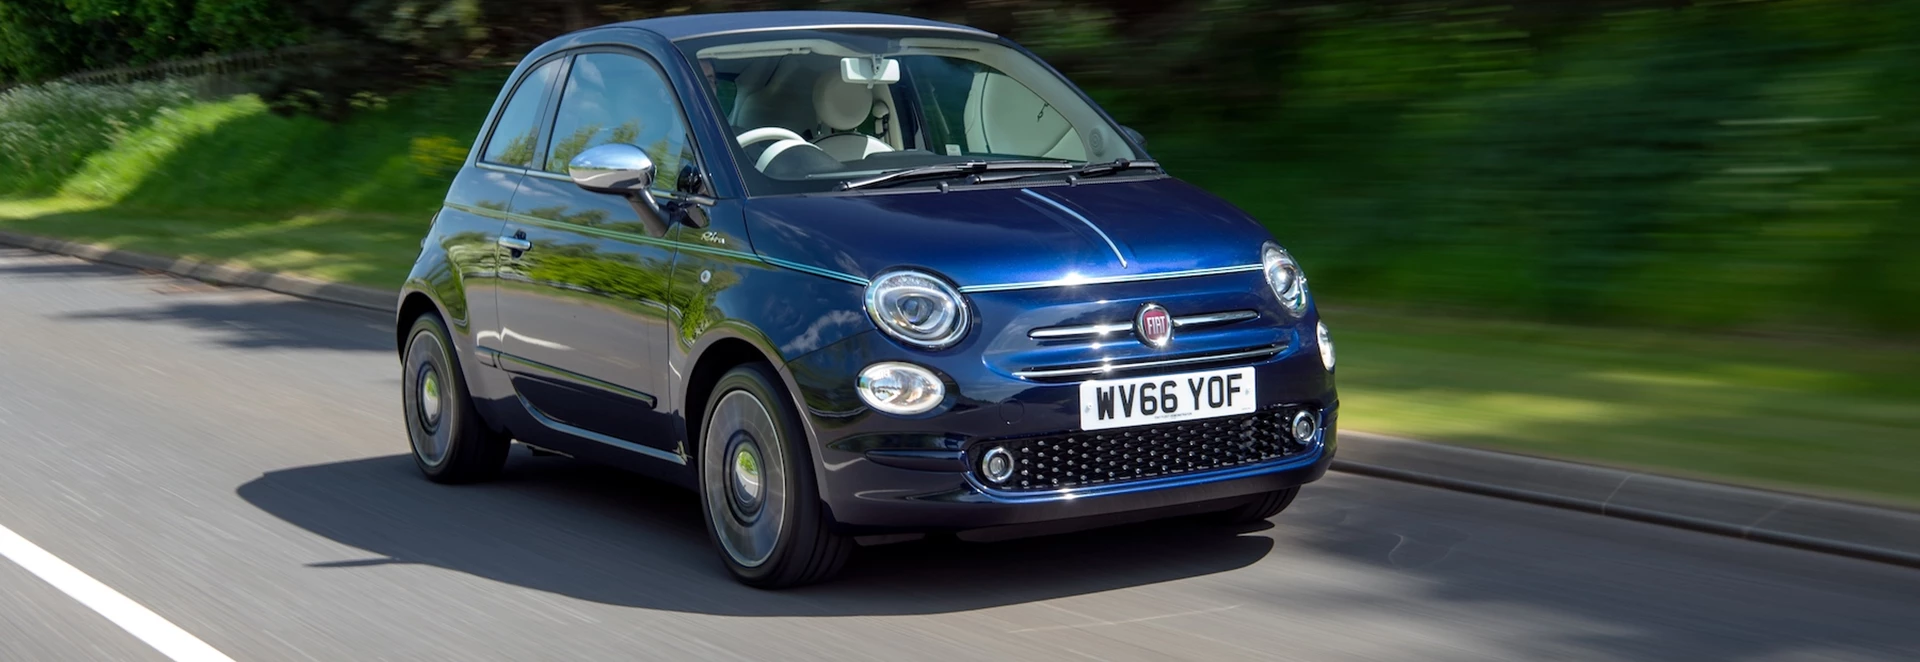 The past, present and future of the Fiat 500 